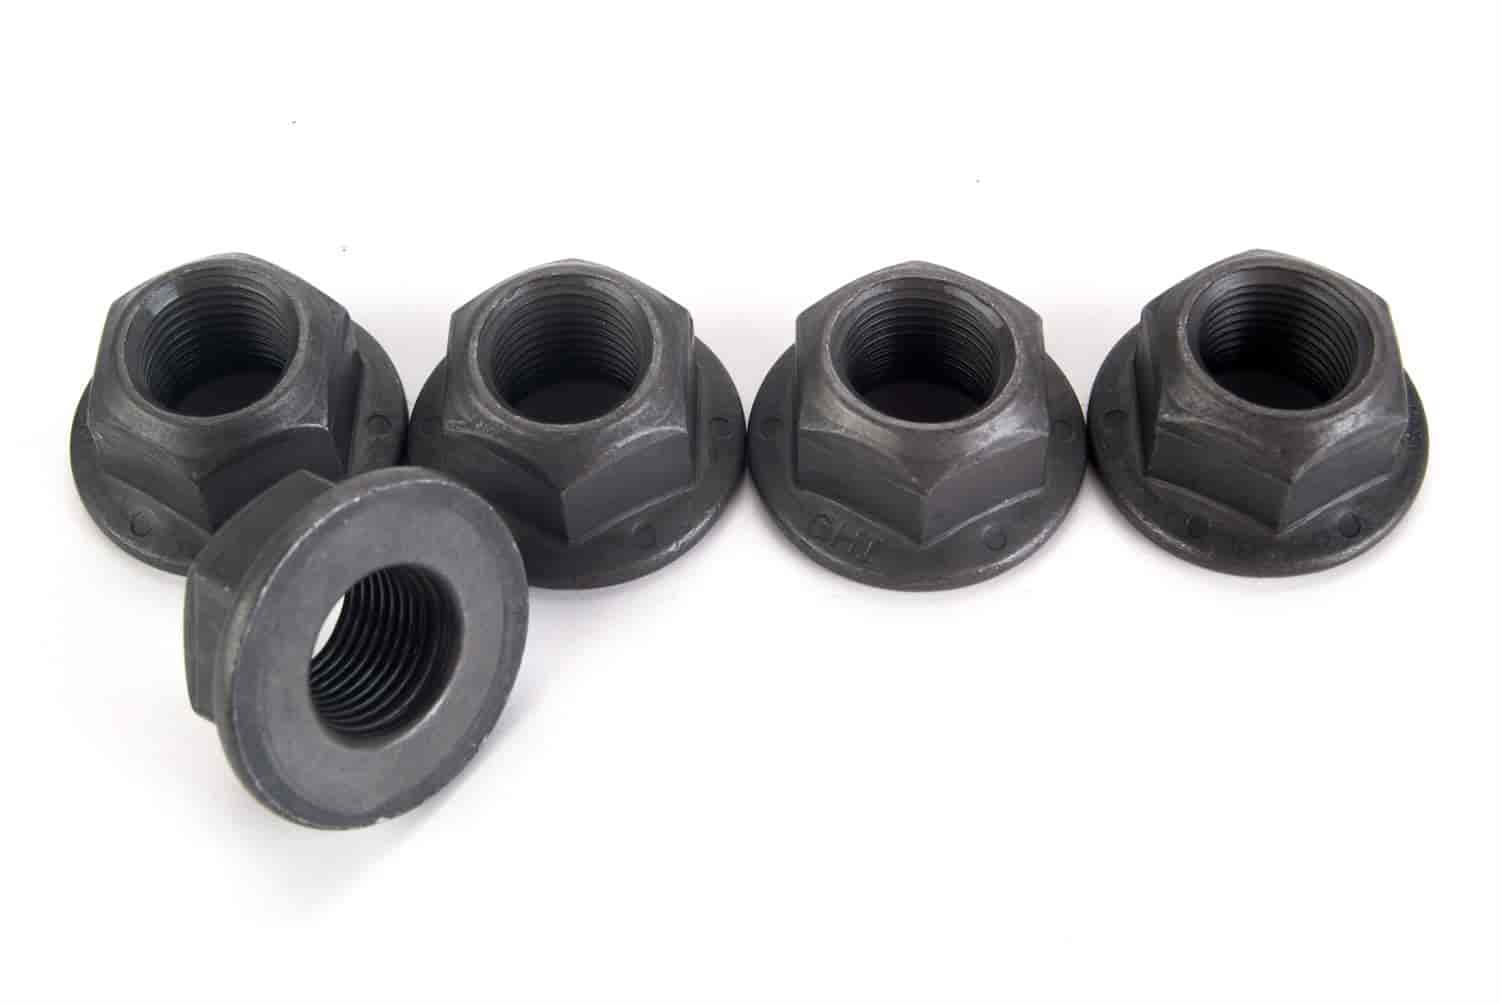 Replacement Flanged Lug Nuts Fits 5/8"-18 Stud